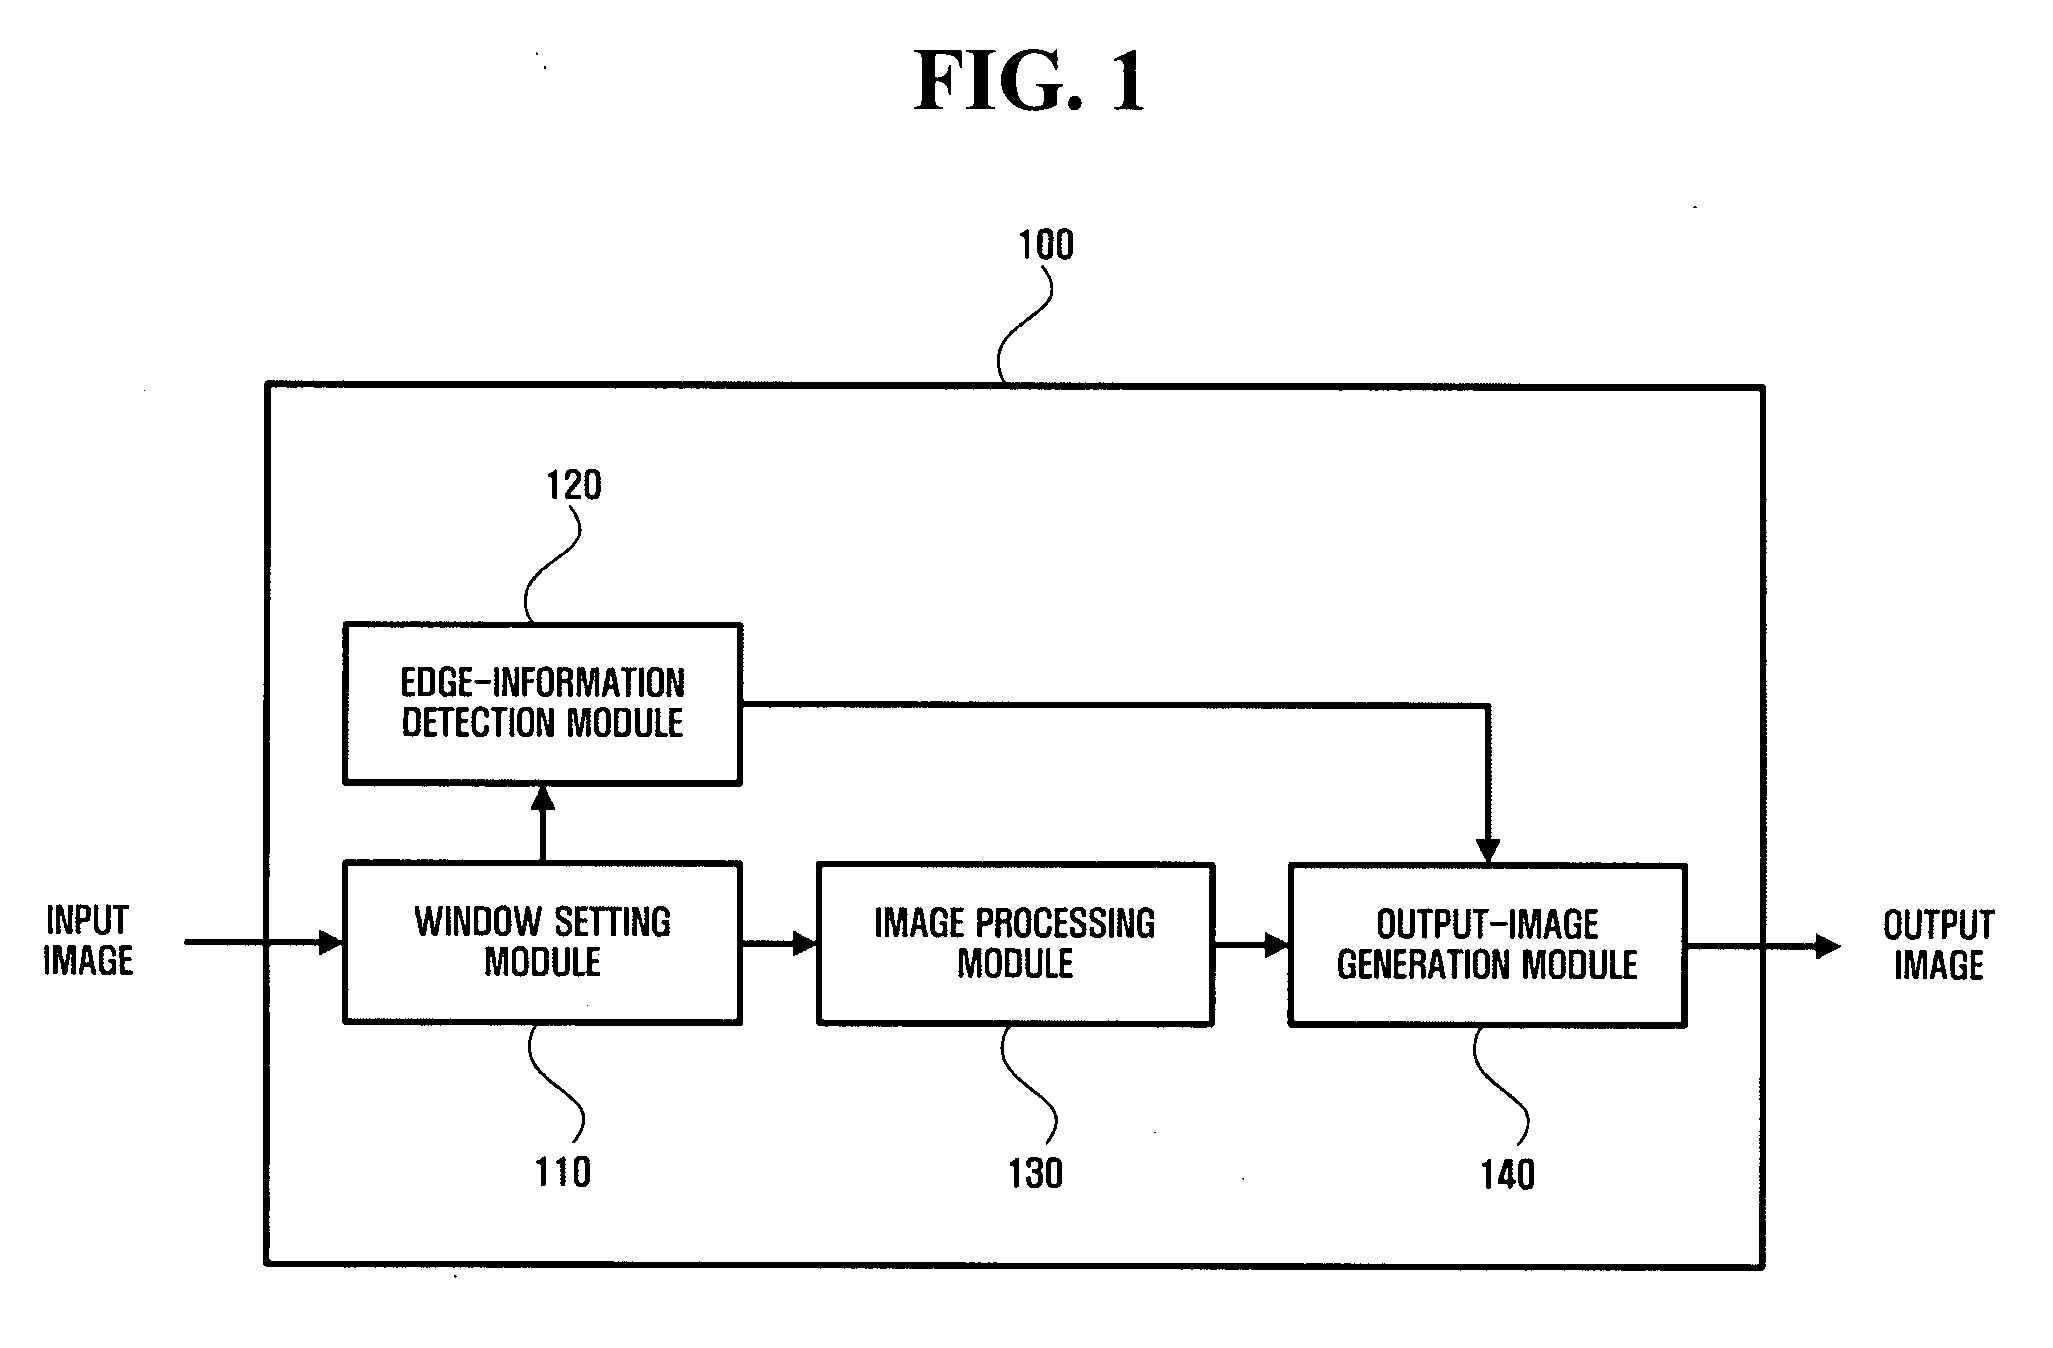 Noise reduction apparatus having edge enhancement function and method thereof